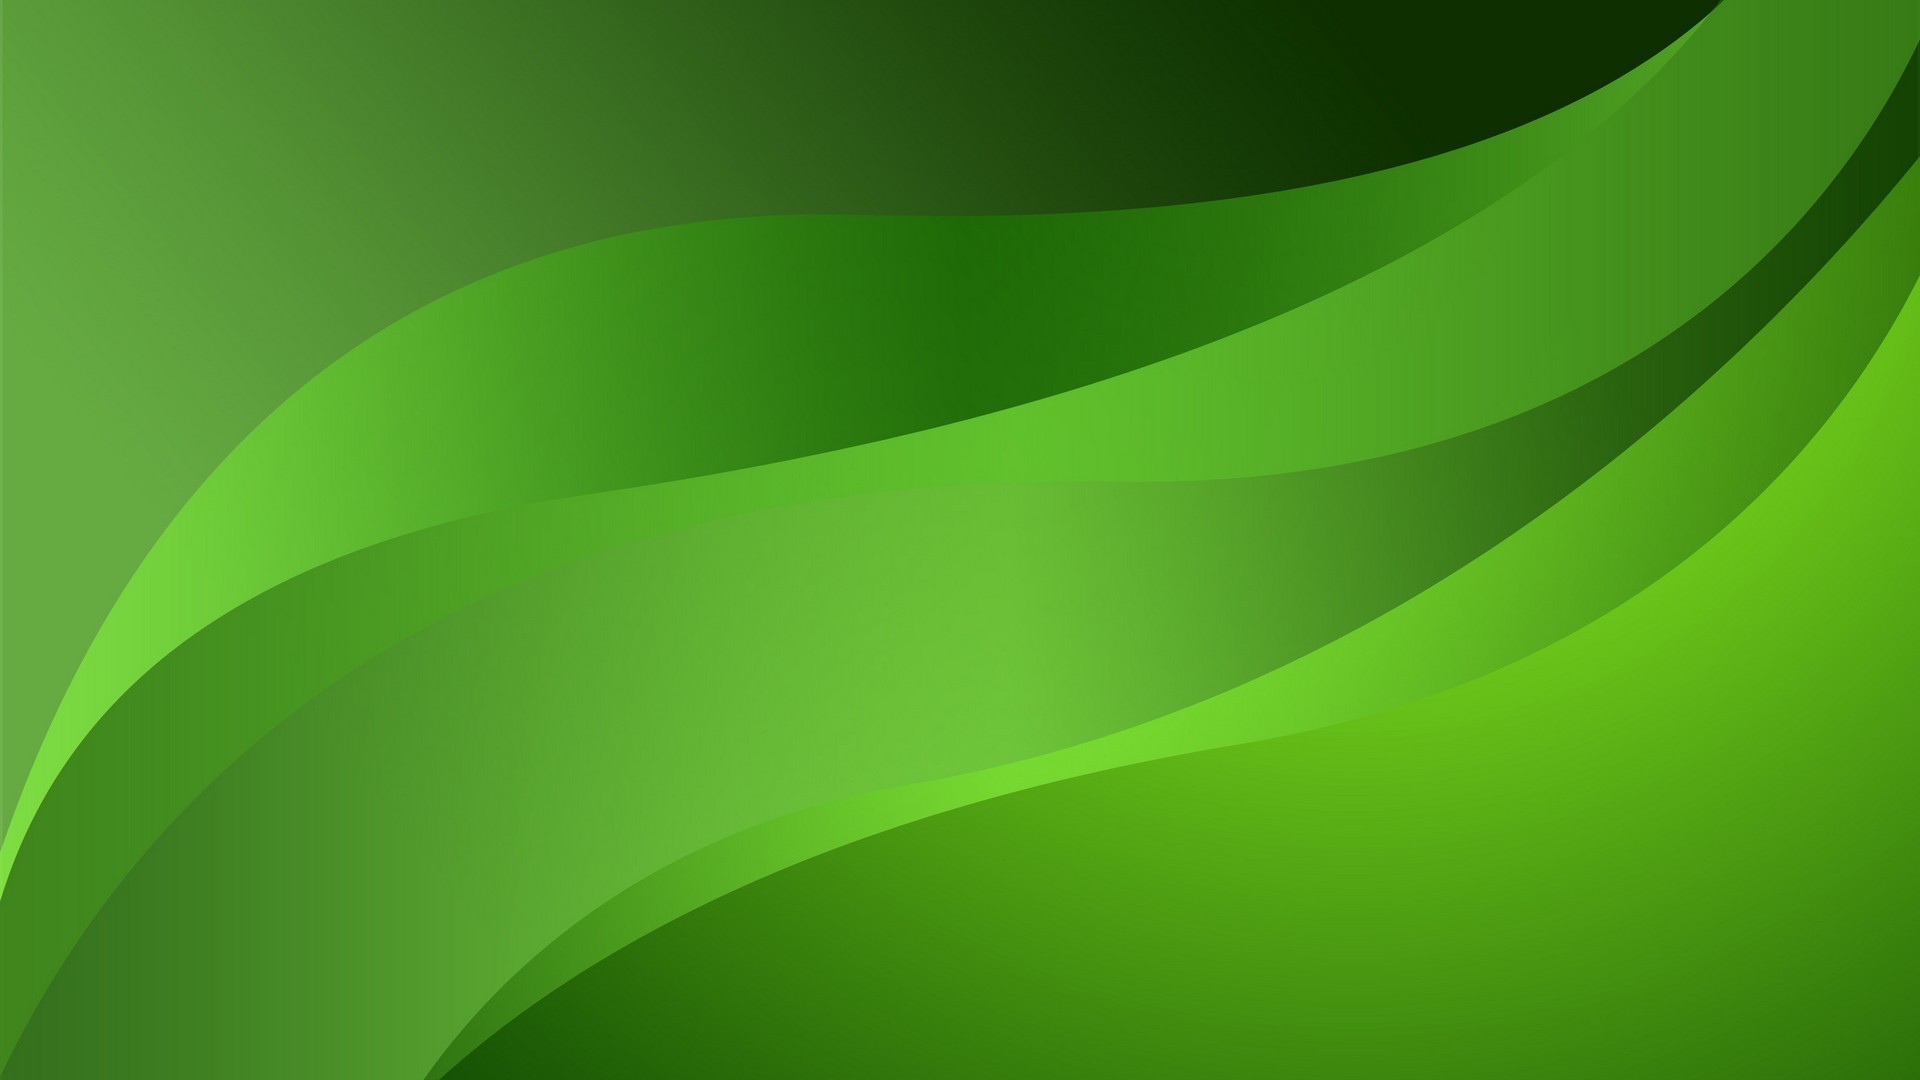 Wallpapers Computer Green Colour With Resolution 1920X1080 pixel. You can make this wallpaper for your Desktop Computer Backgrounds, Mac Wallpapers, Android Lock screen or iPhone Screensavers